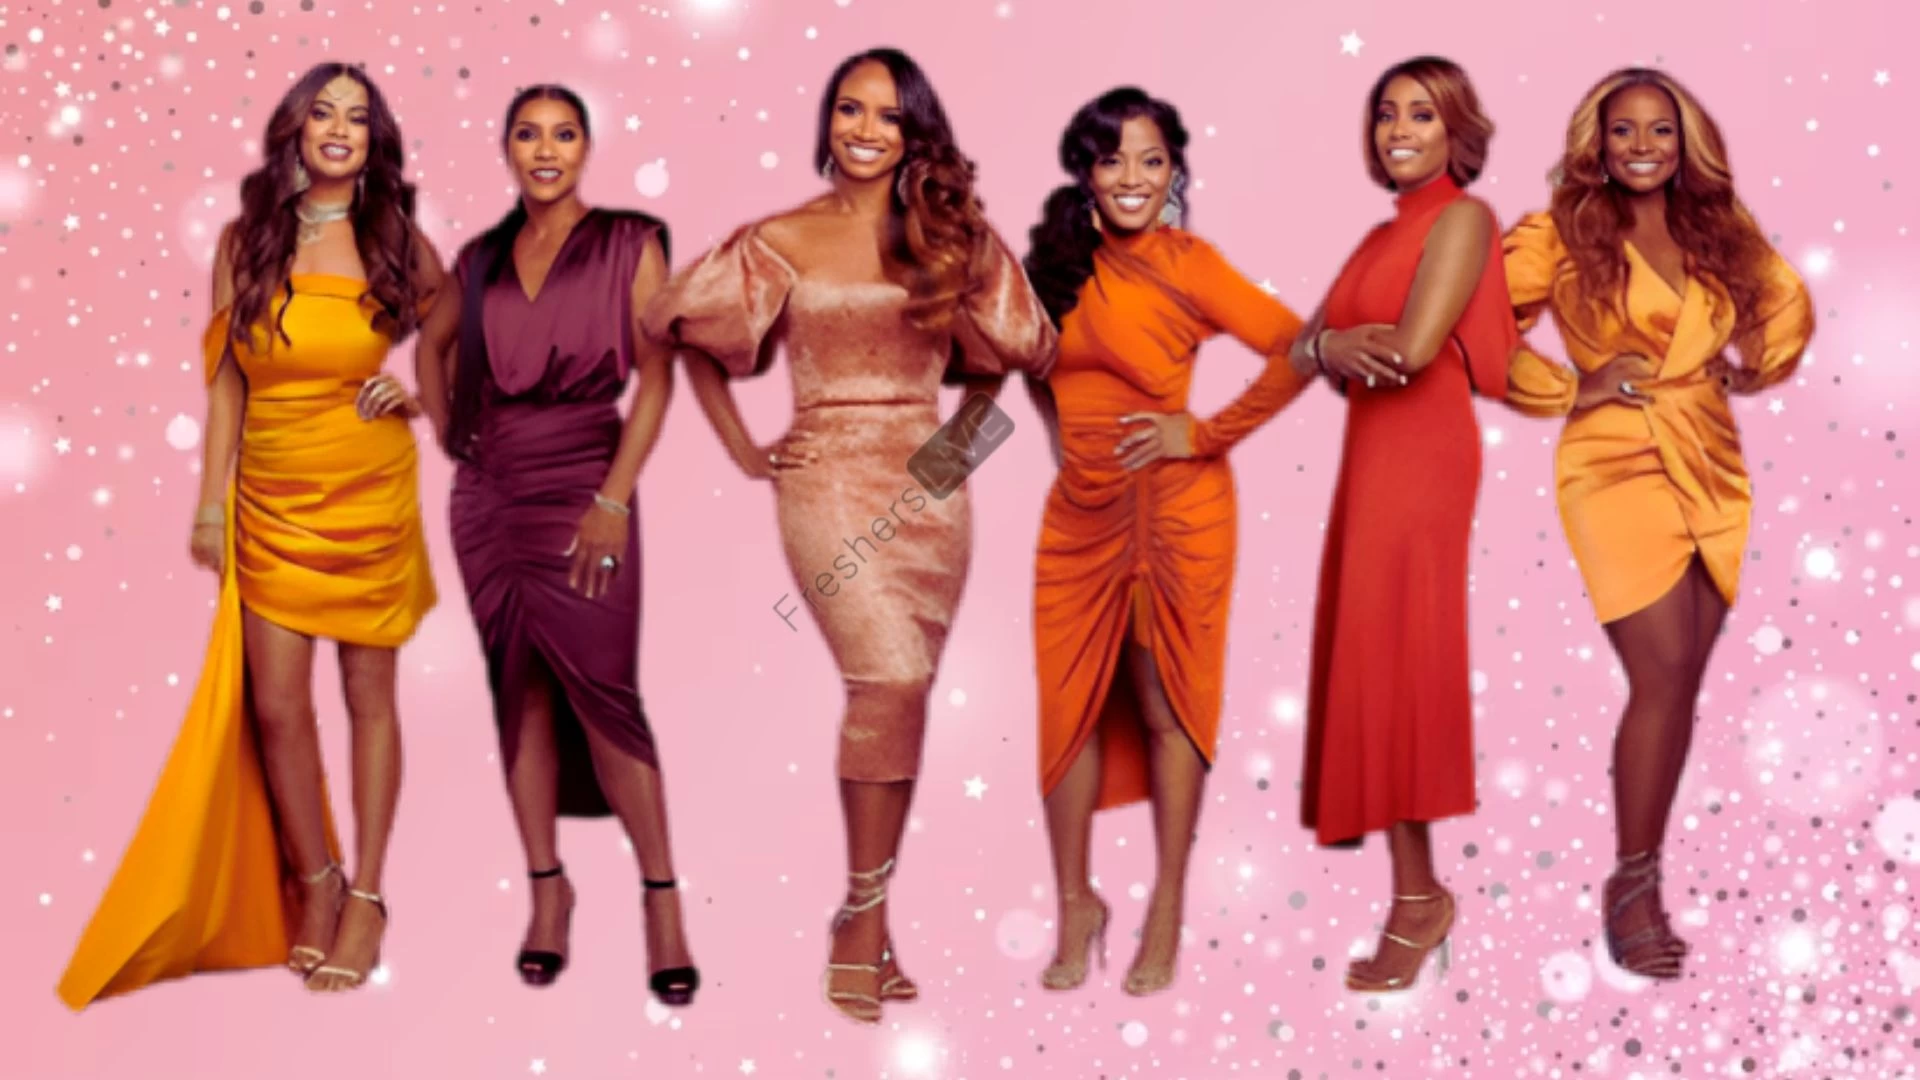 Married To Medicine Season 10 Release Date and Time, Countdown, When Is It Coming Out?